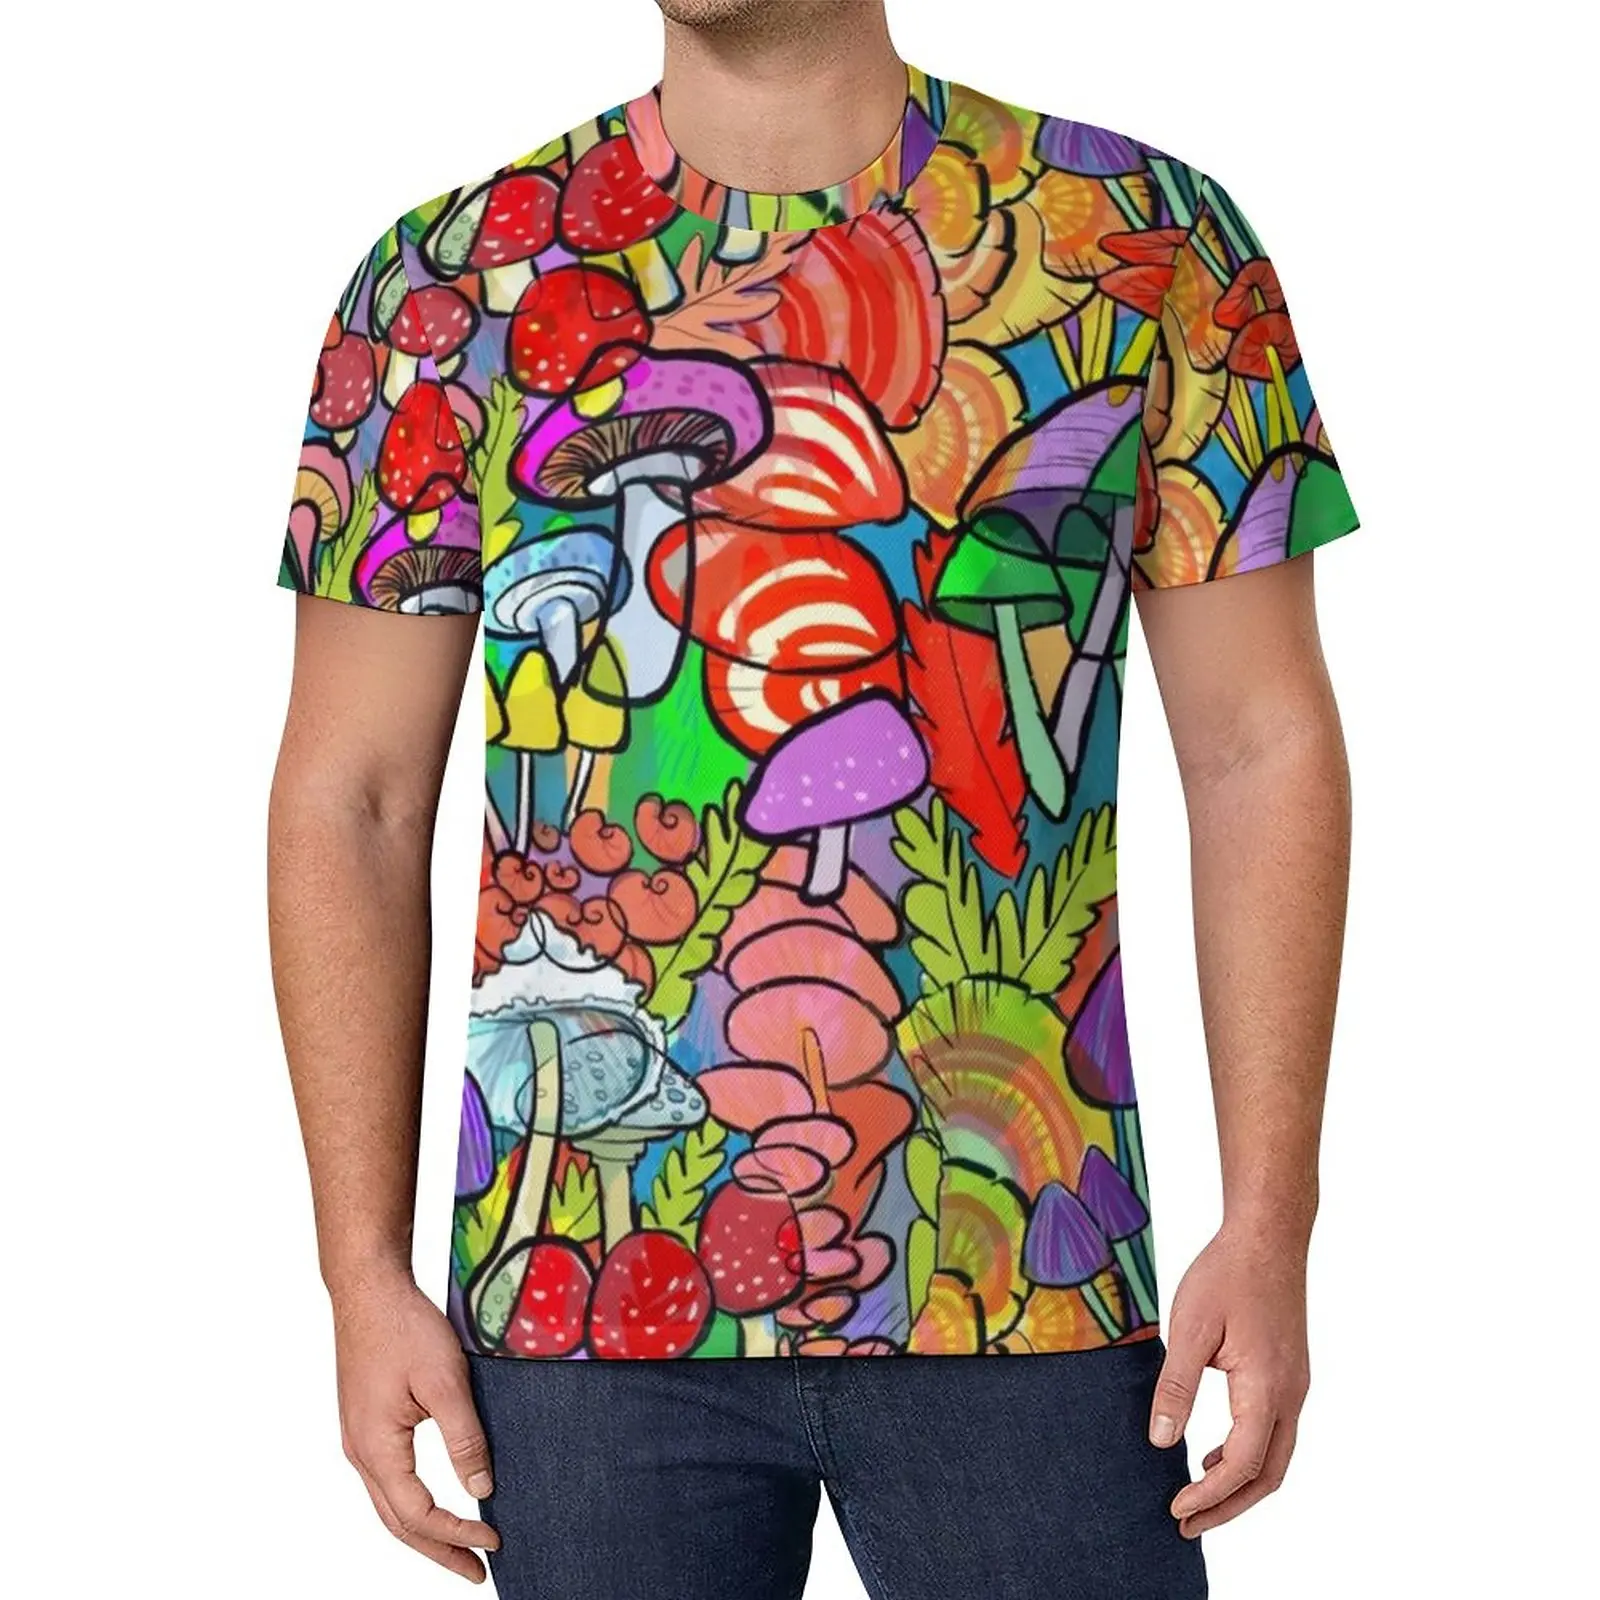 

Colorful Mushroom T Shirt Overnight A Forest Cool T-Shirts Short Sleeve Graphic Tops Street Style Oversize Clothes